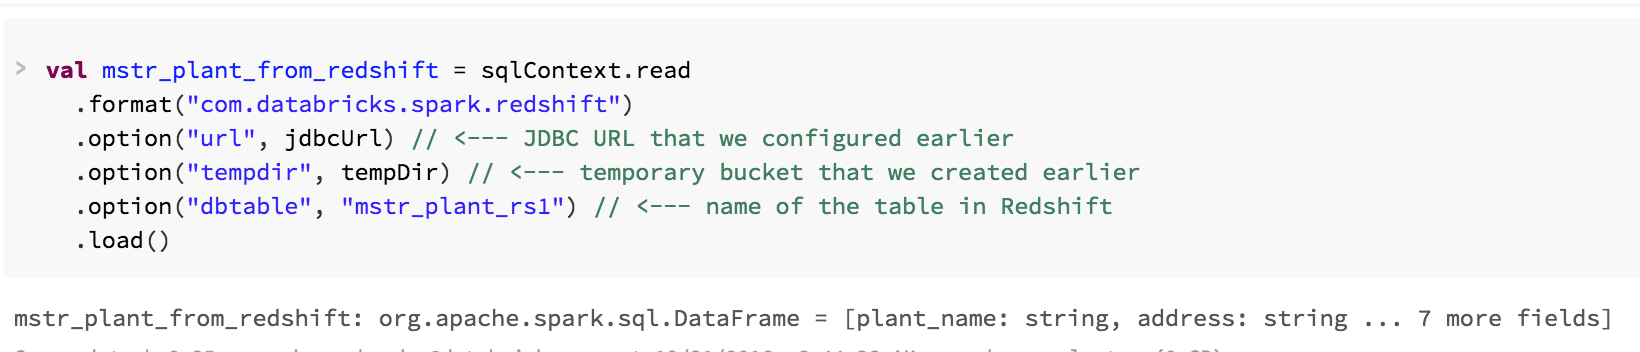 Screenshot from a Databricks notebook demonstrating how to create a Dataframe from an entire Redshift table.